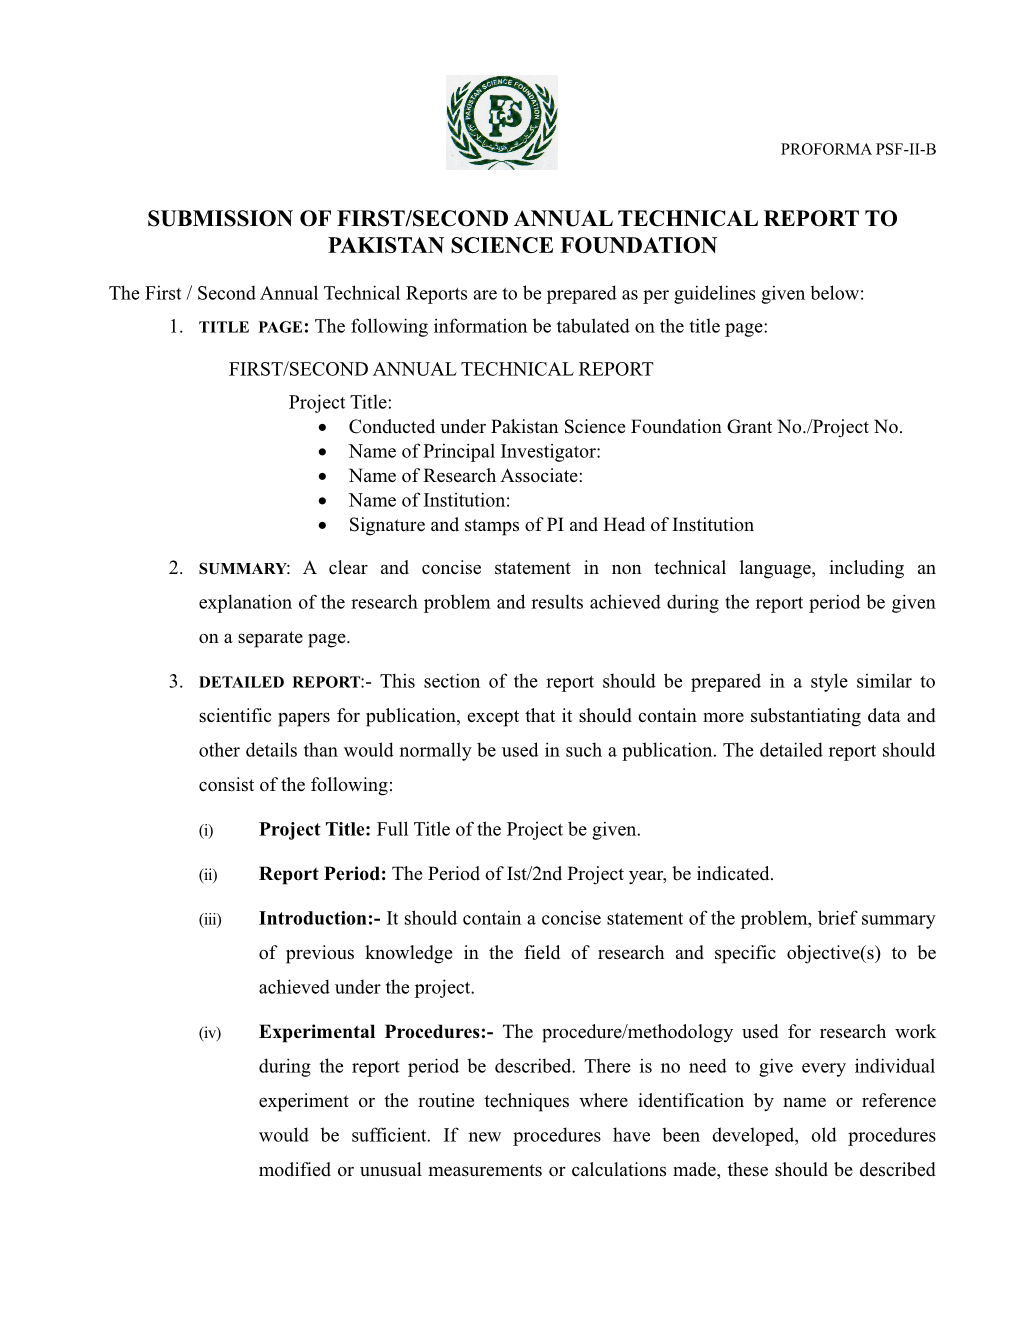 Submission of First/Second Annual Technical Report to Pakistan Science Foundation